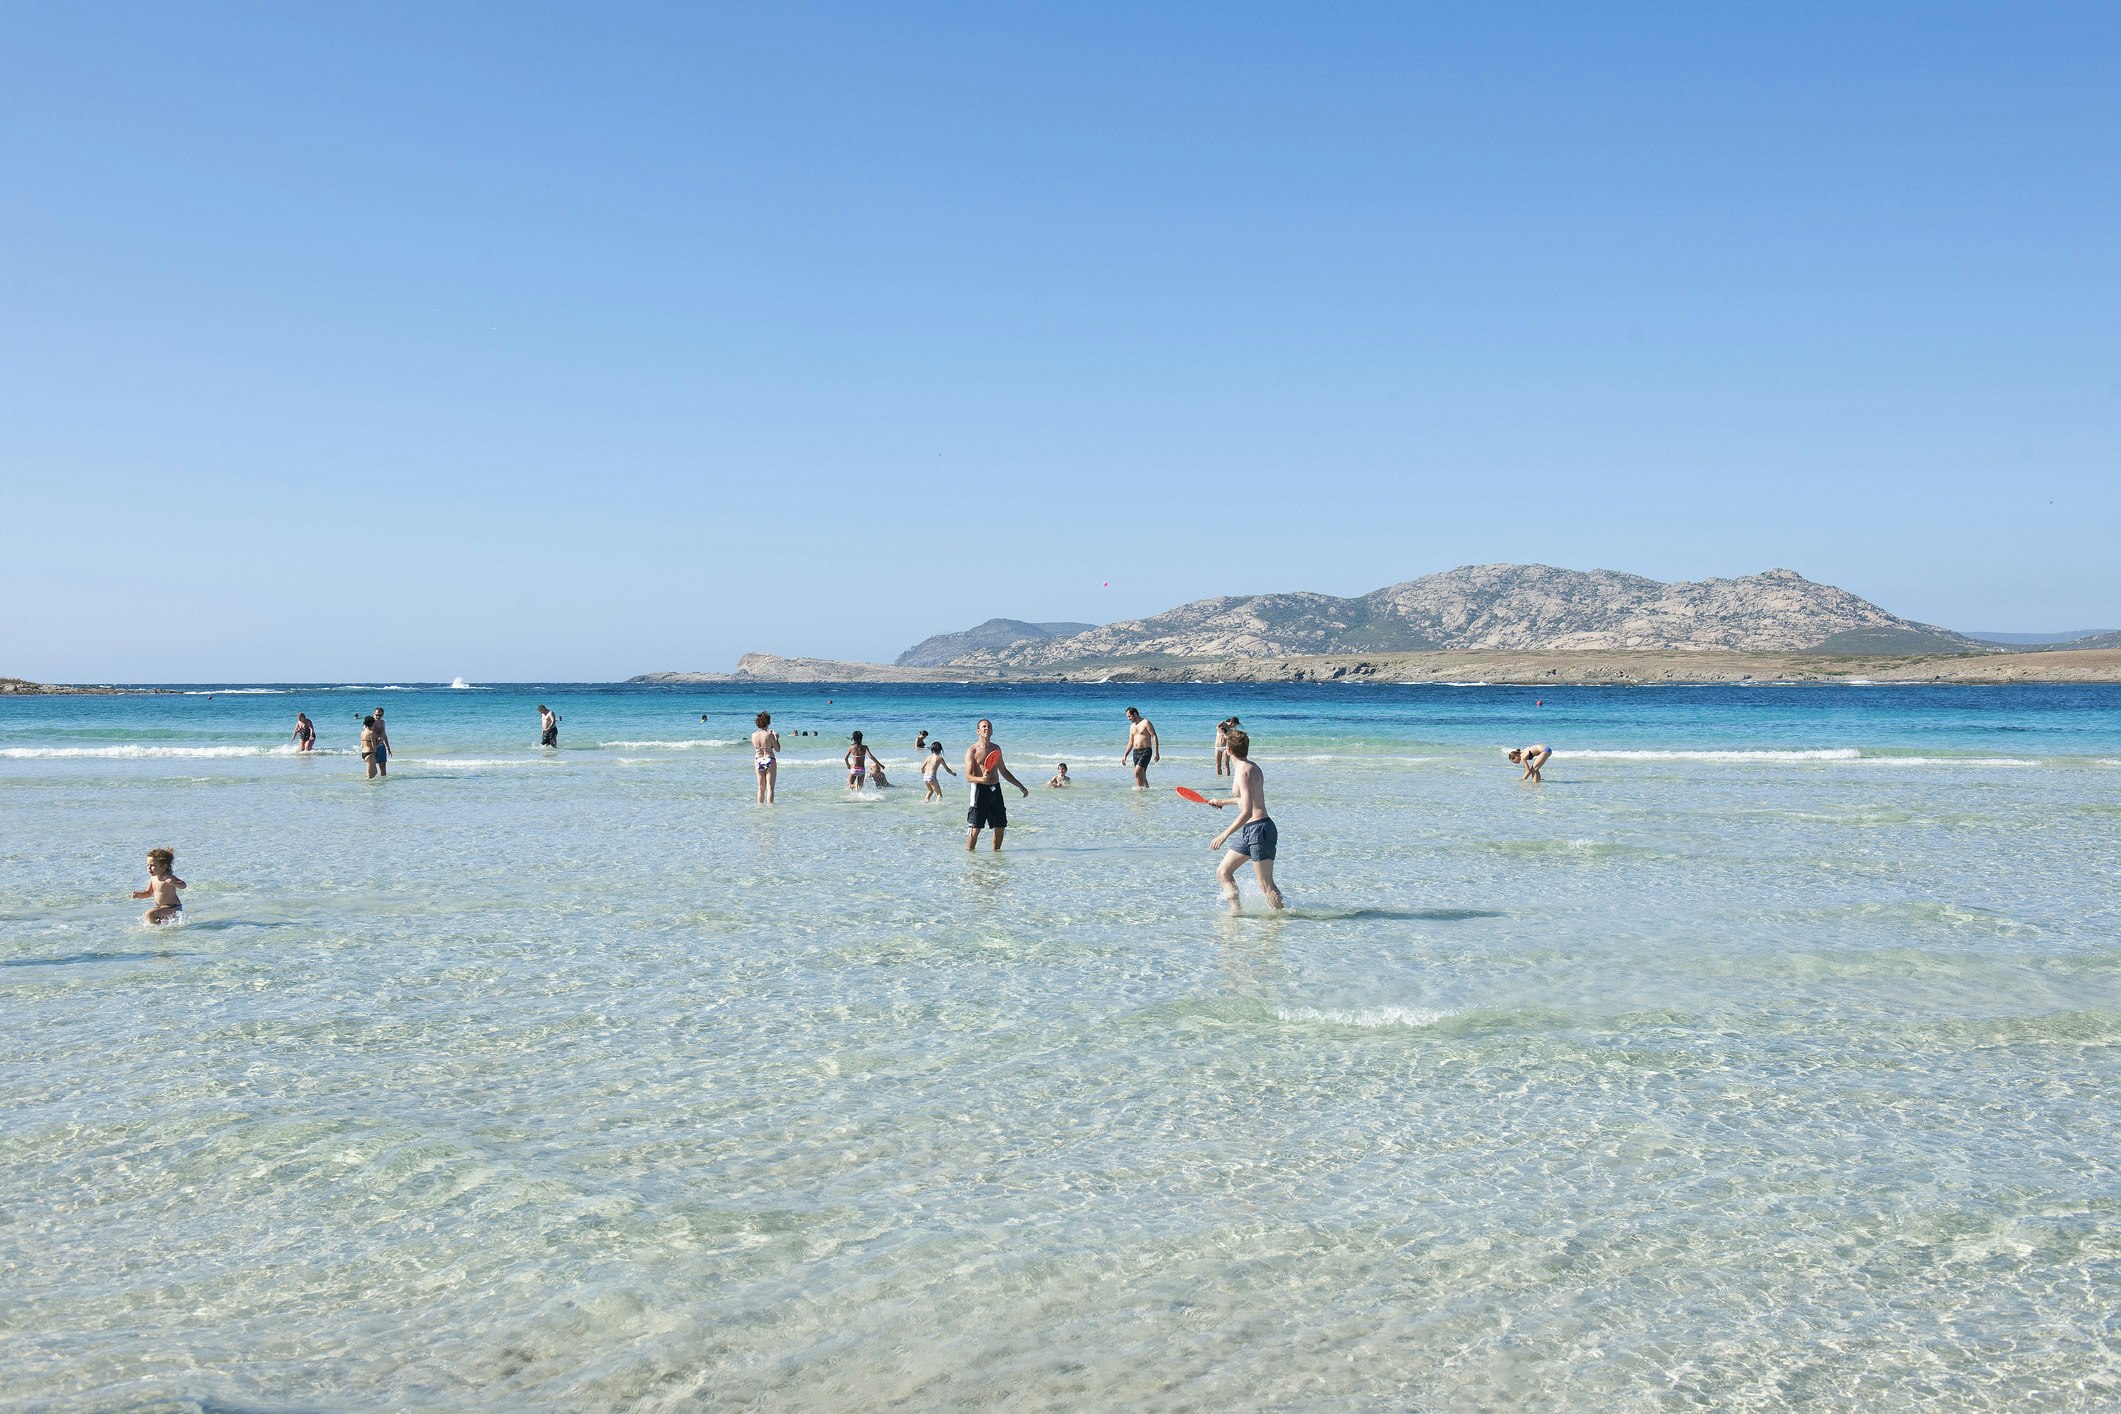 People play in the water on a beach in Sardinia